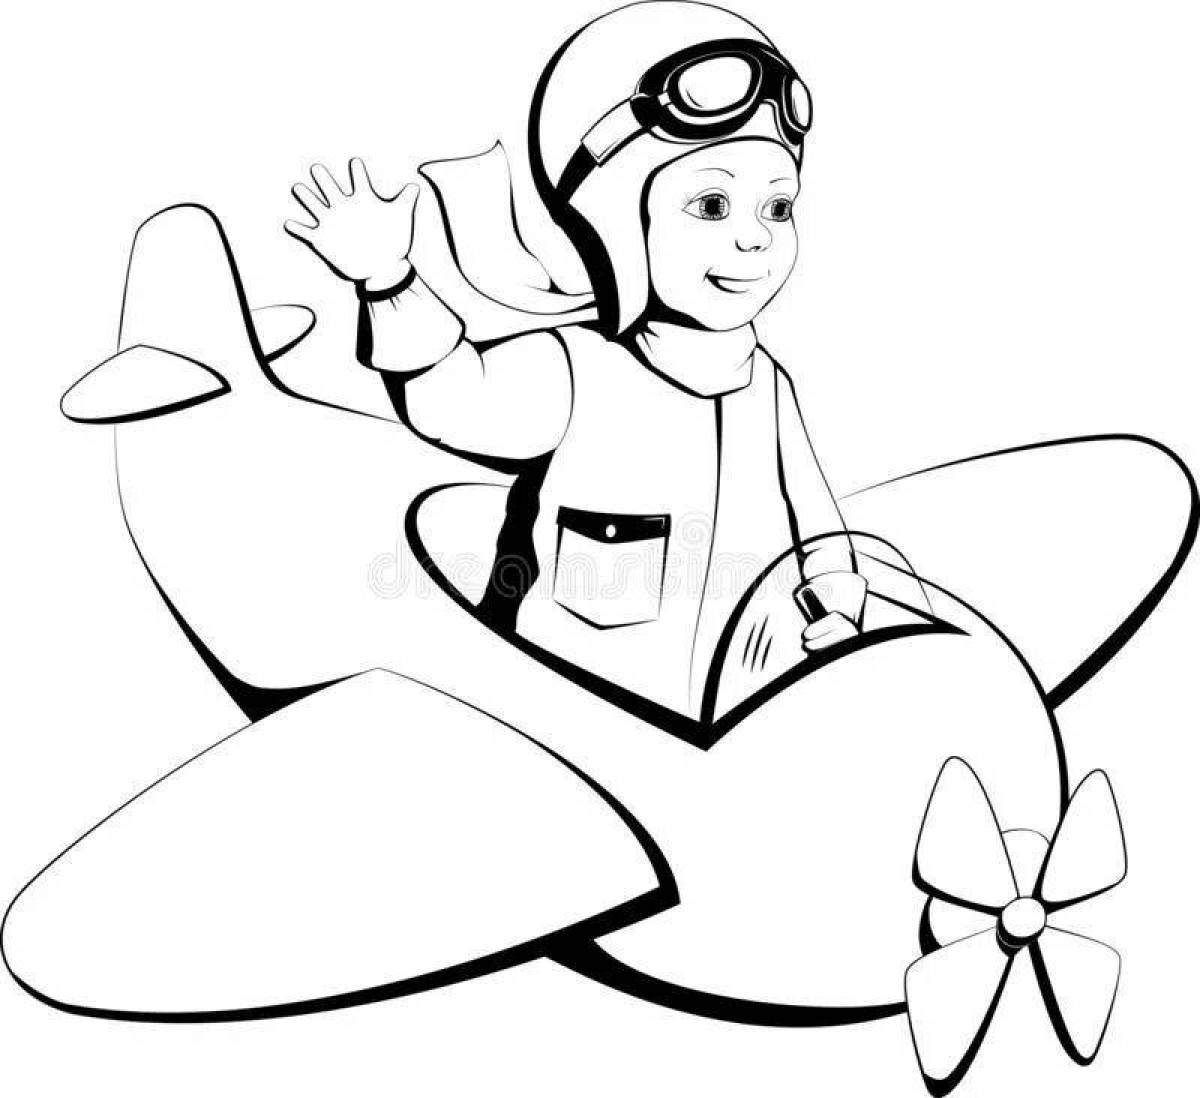 Adorable pilot coloring book for kids